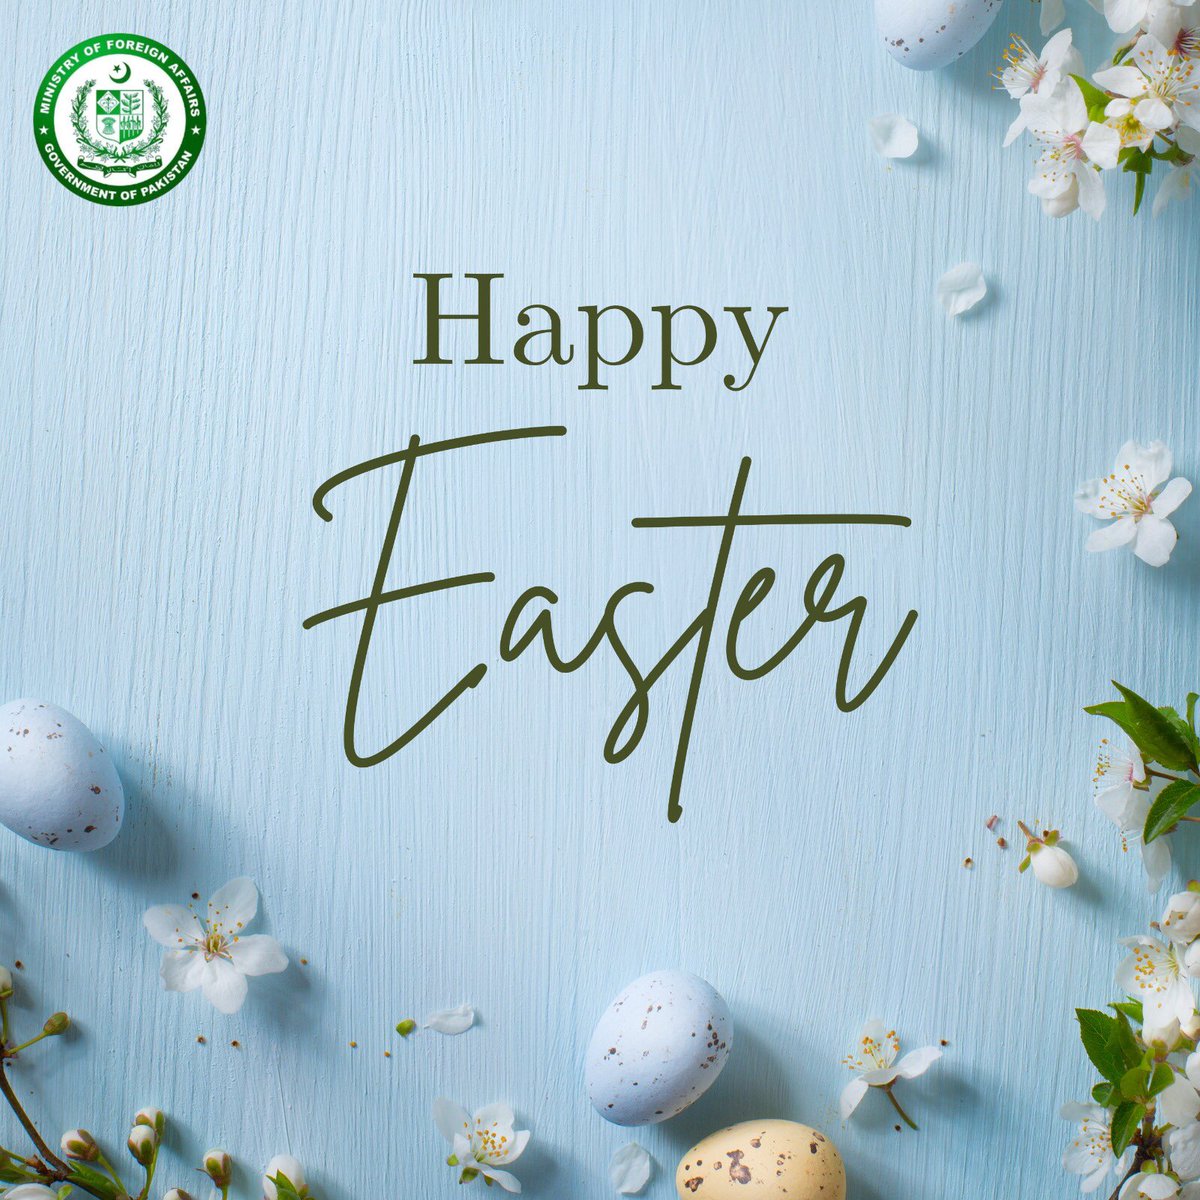 ✨Warmest Easter greetings! May this joyous occasion inspire renewed hope, unity, and peace. Let's celebrate diversity and foster understanding and work for a brighter, more connected world.